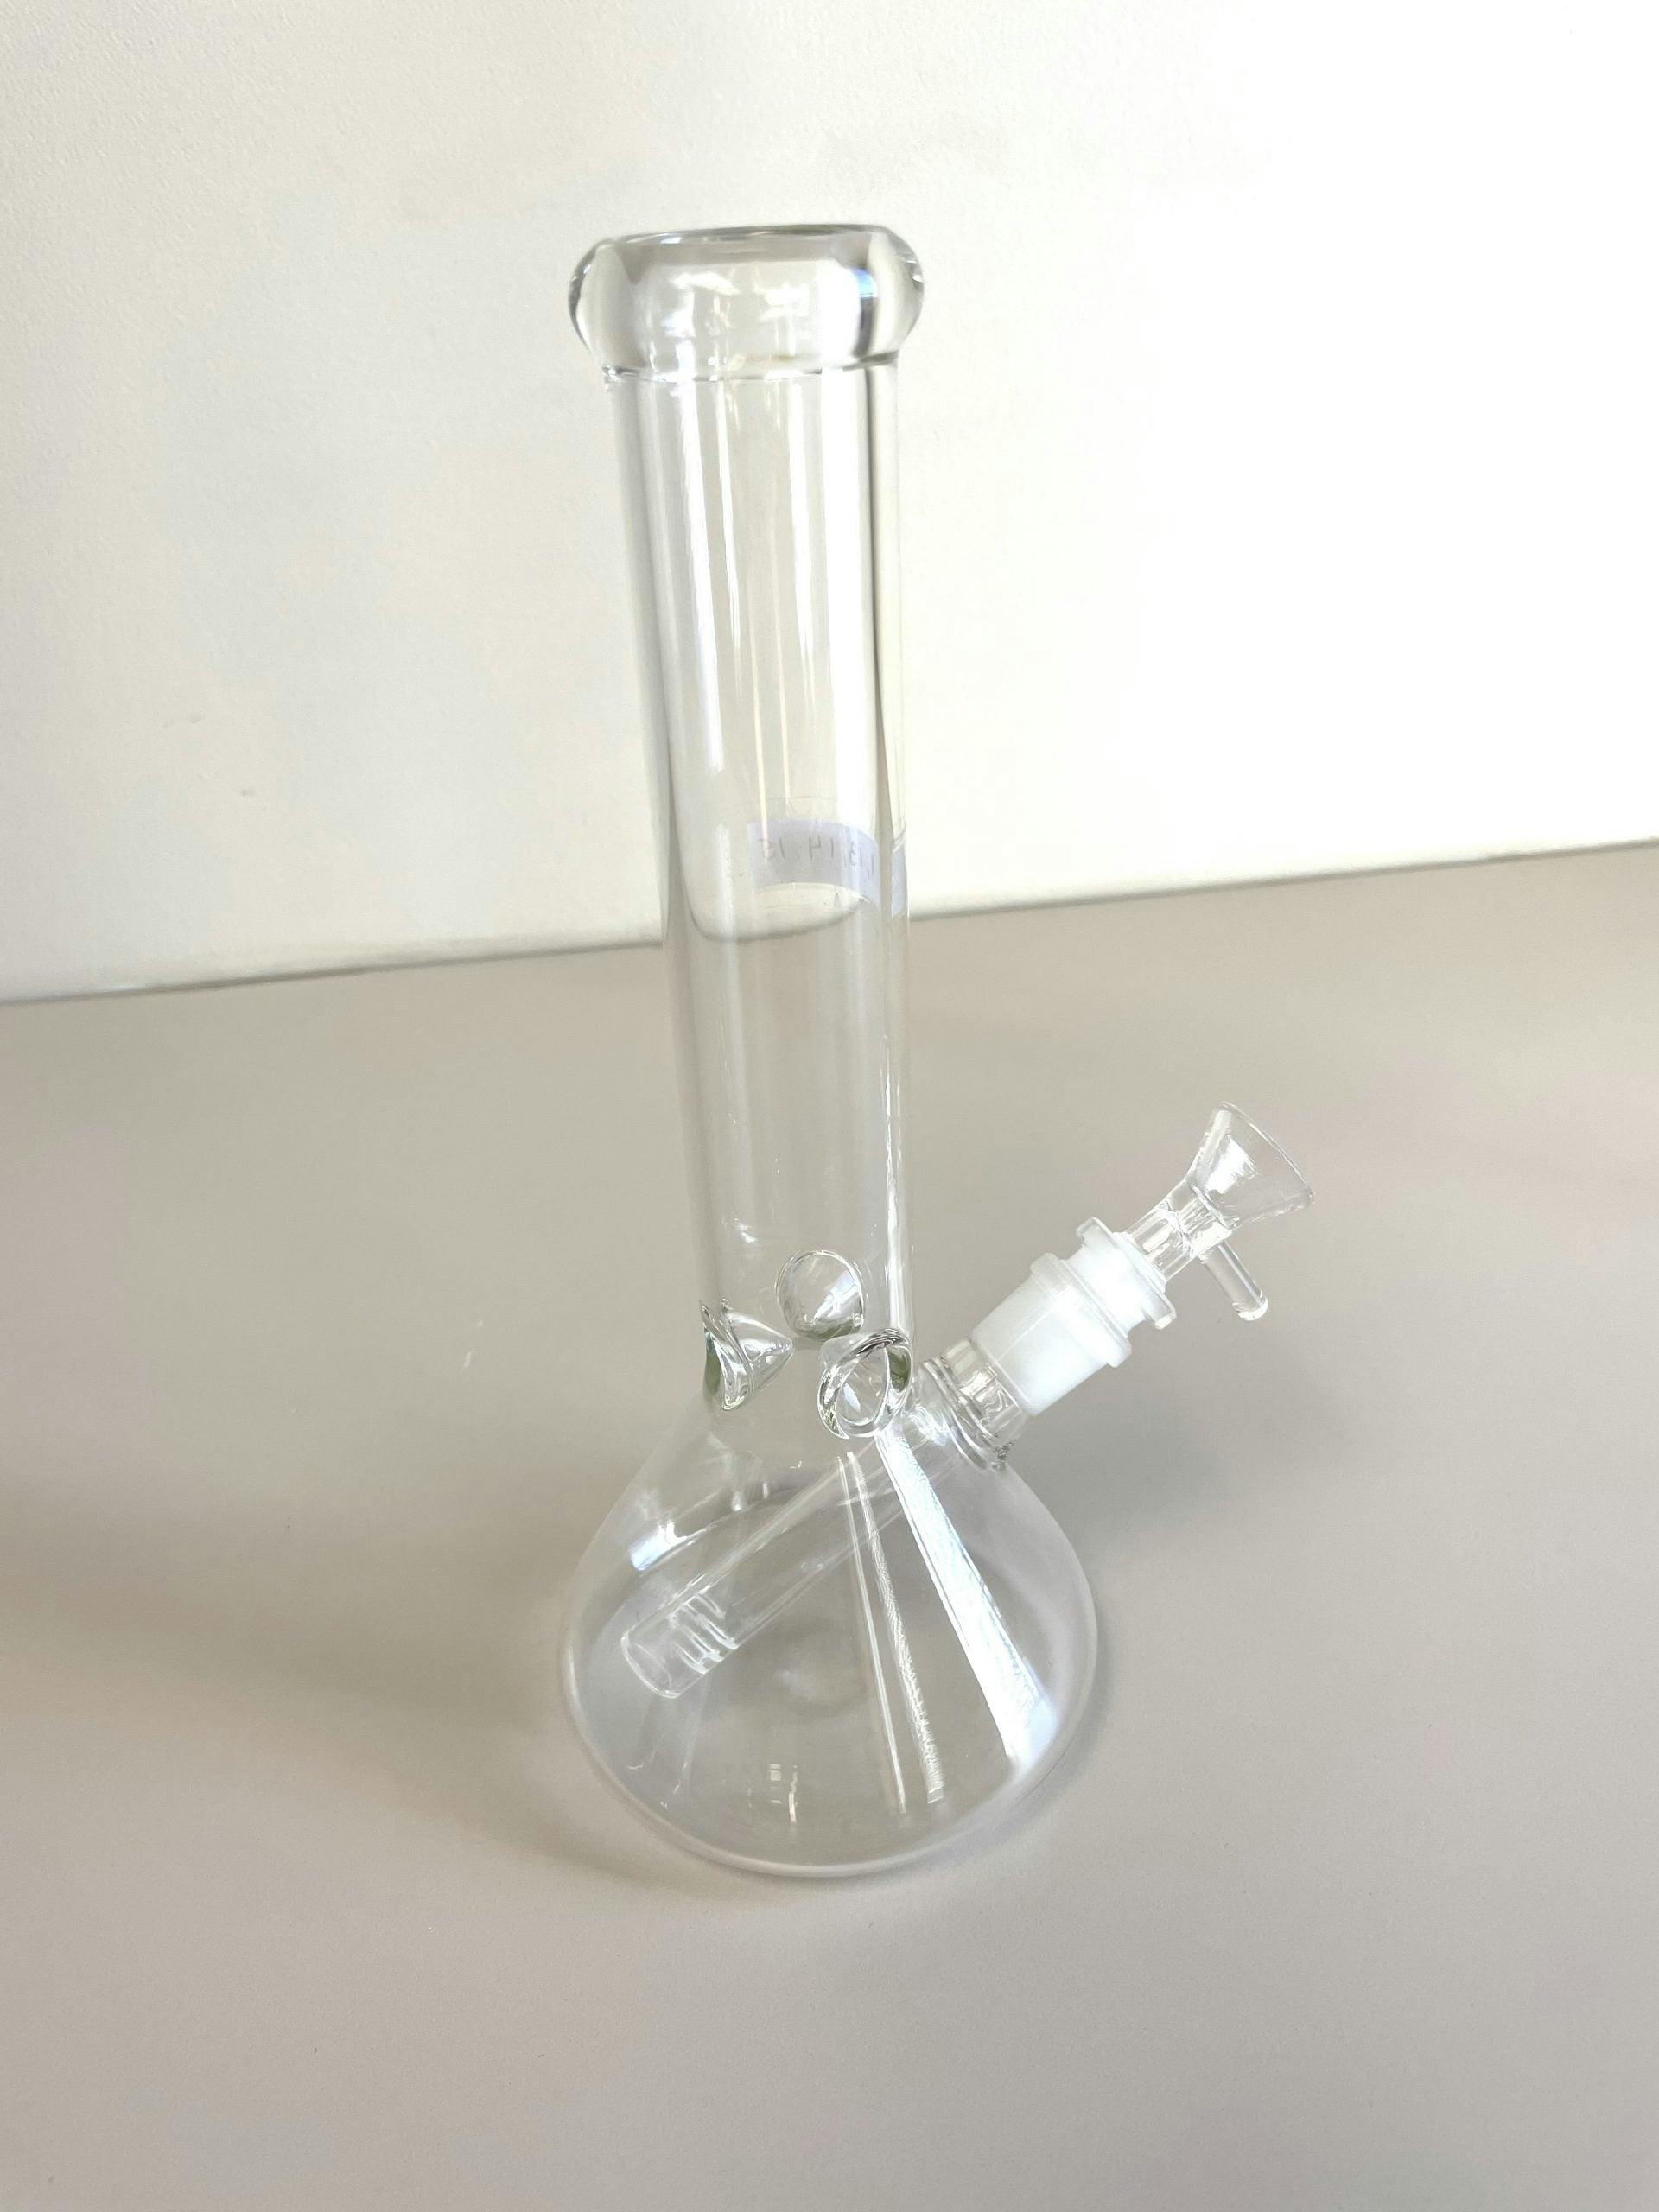 Product for sale: TYI BO-091 - 10" Glass Bong